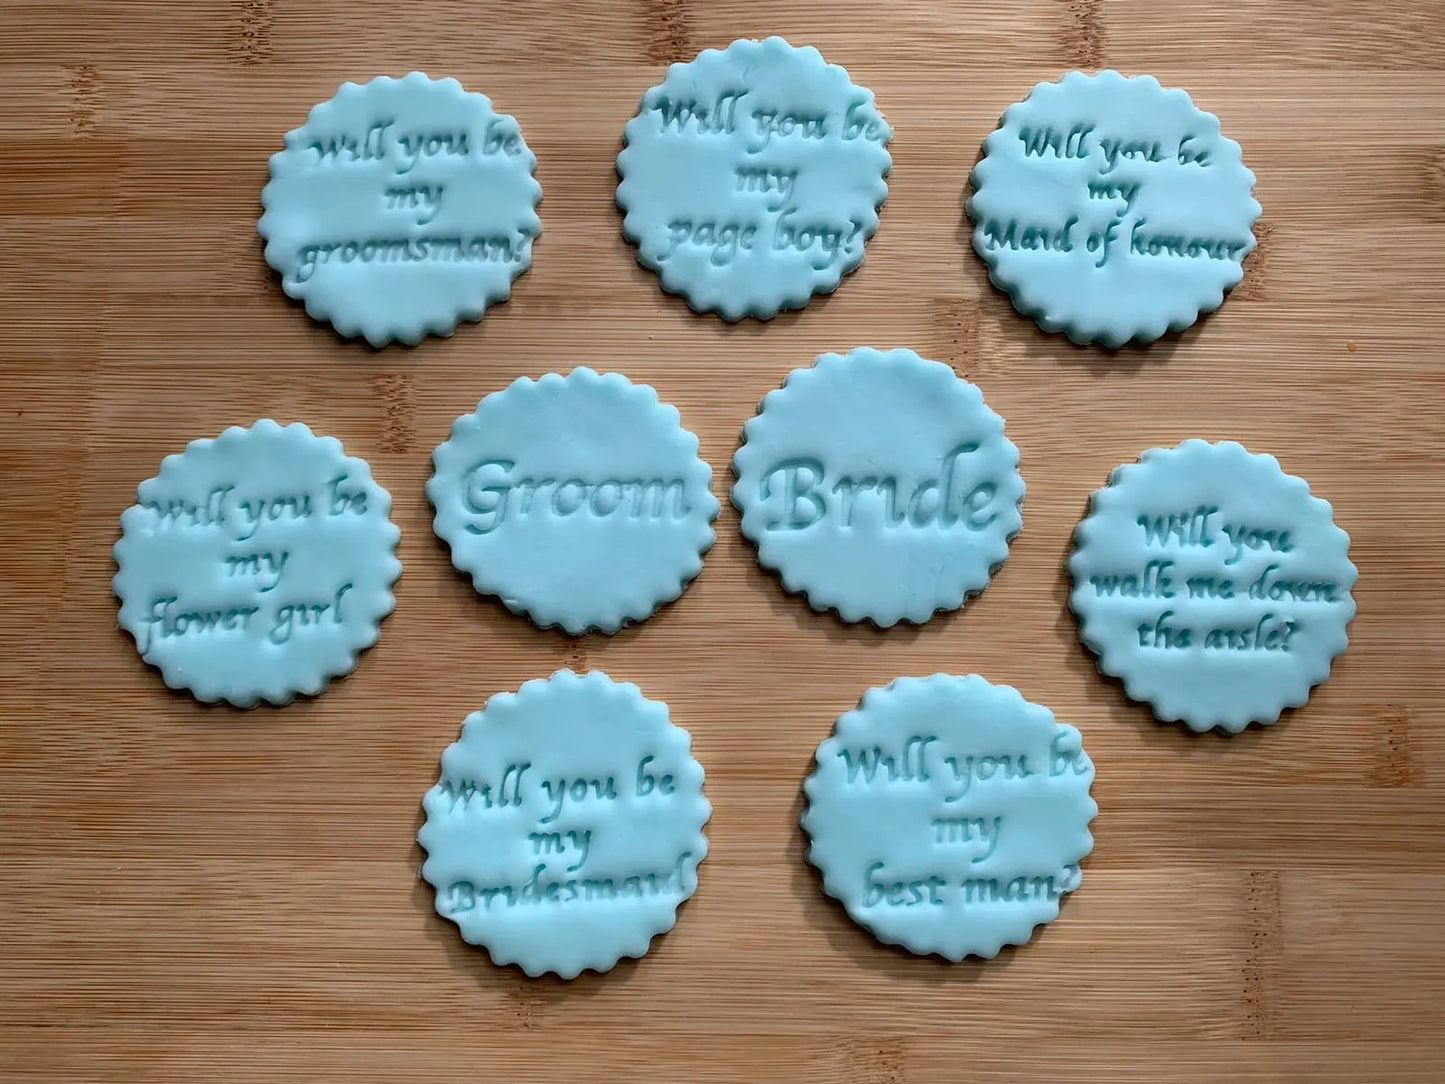 Bride and Groom collection stamps - embossers MEG cookie cutters